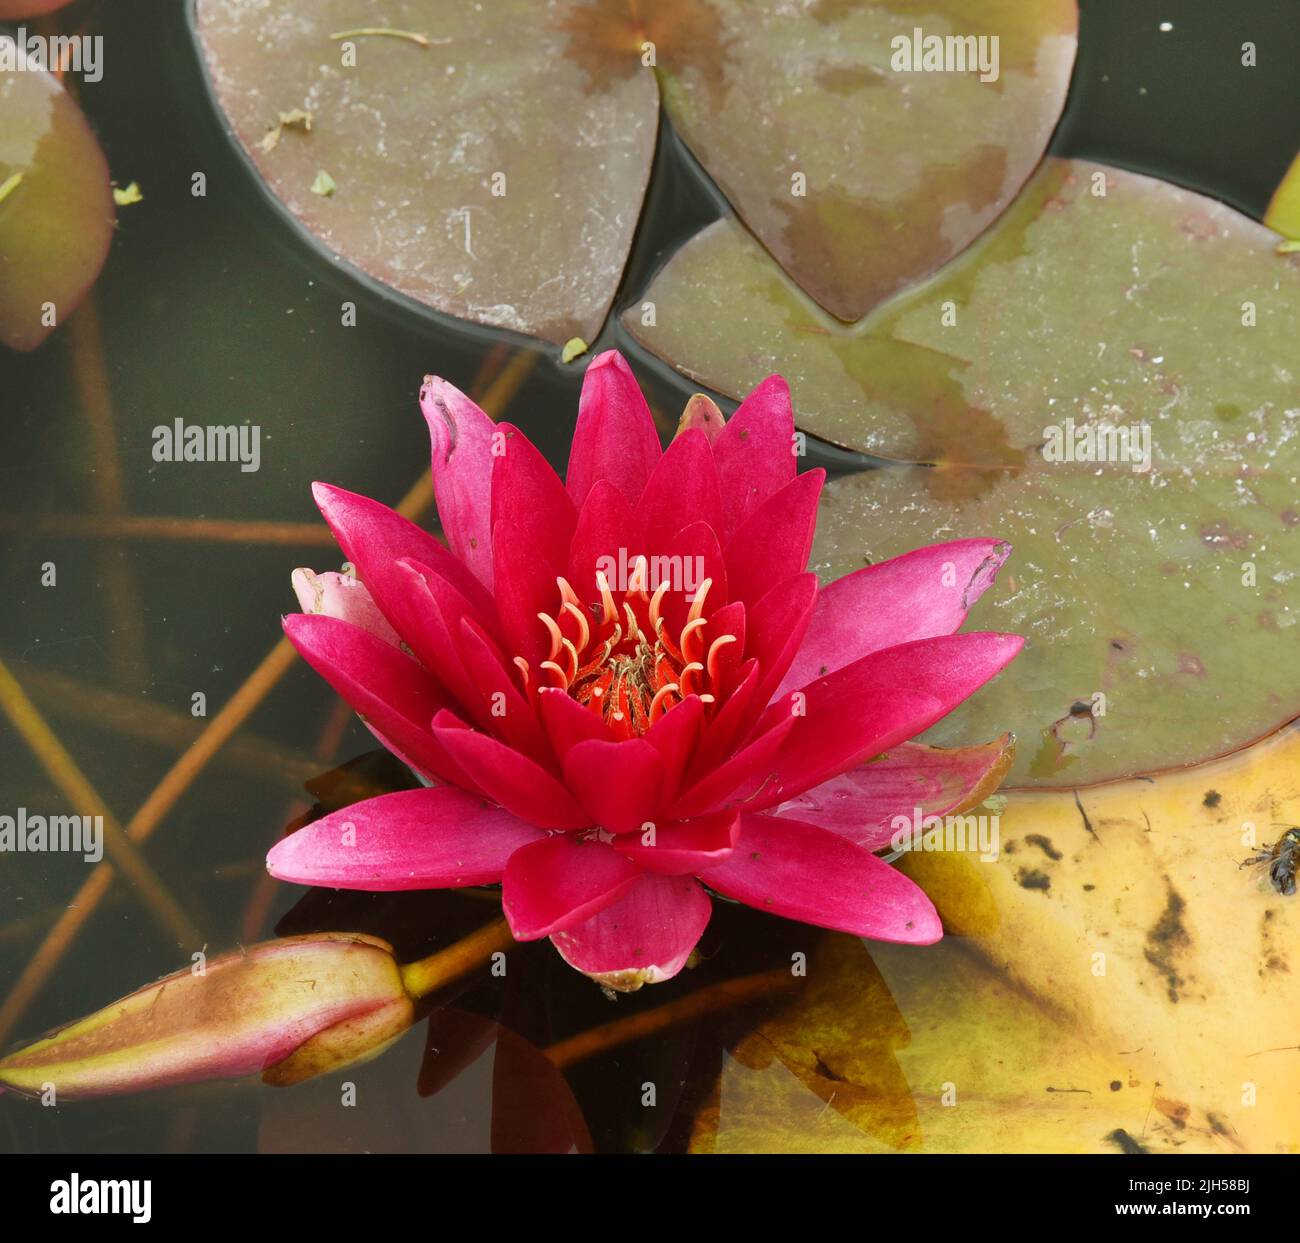 Leipzig, Germany. 15th July, 2022. 15 July 2022, Saxony, Althen Bei Leipzig: A freshly planted, dark red mother water lily of the 'Escarboucle' variety is in bloom at the Krause water plant nursery. In recent years, too many koi have nibbled the shoots of the dark red 'queens of the ponds', which are particularly sought after by customers, thus preventing growth. Around 20 varieties of water lilies and other aquatic plants grow on an area of around 5,000 square meters for customers throughout Germany. In natural waters, water lilies are highly endangered and are therefore protected. Photo: Wal Stock Photo